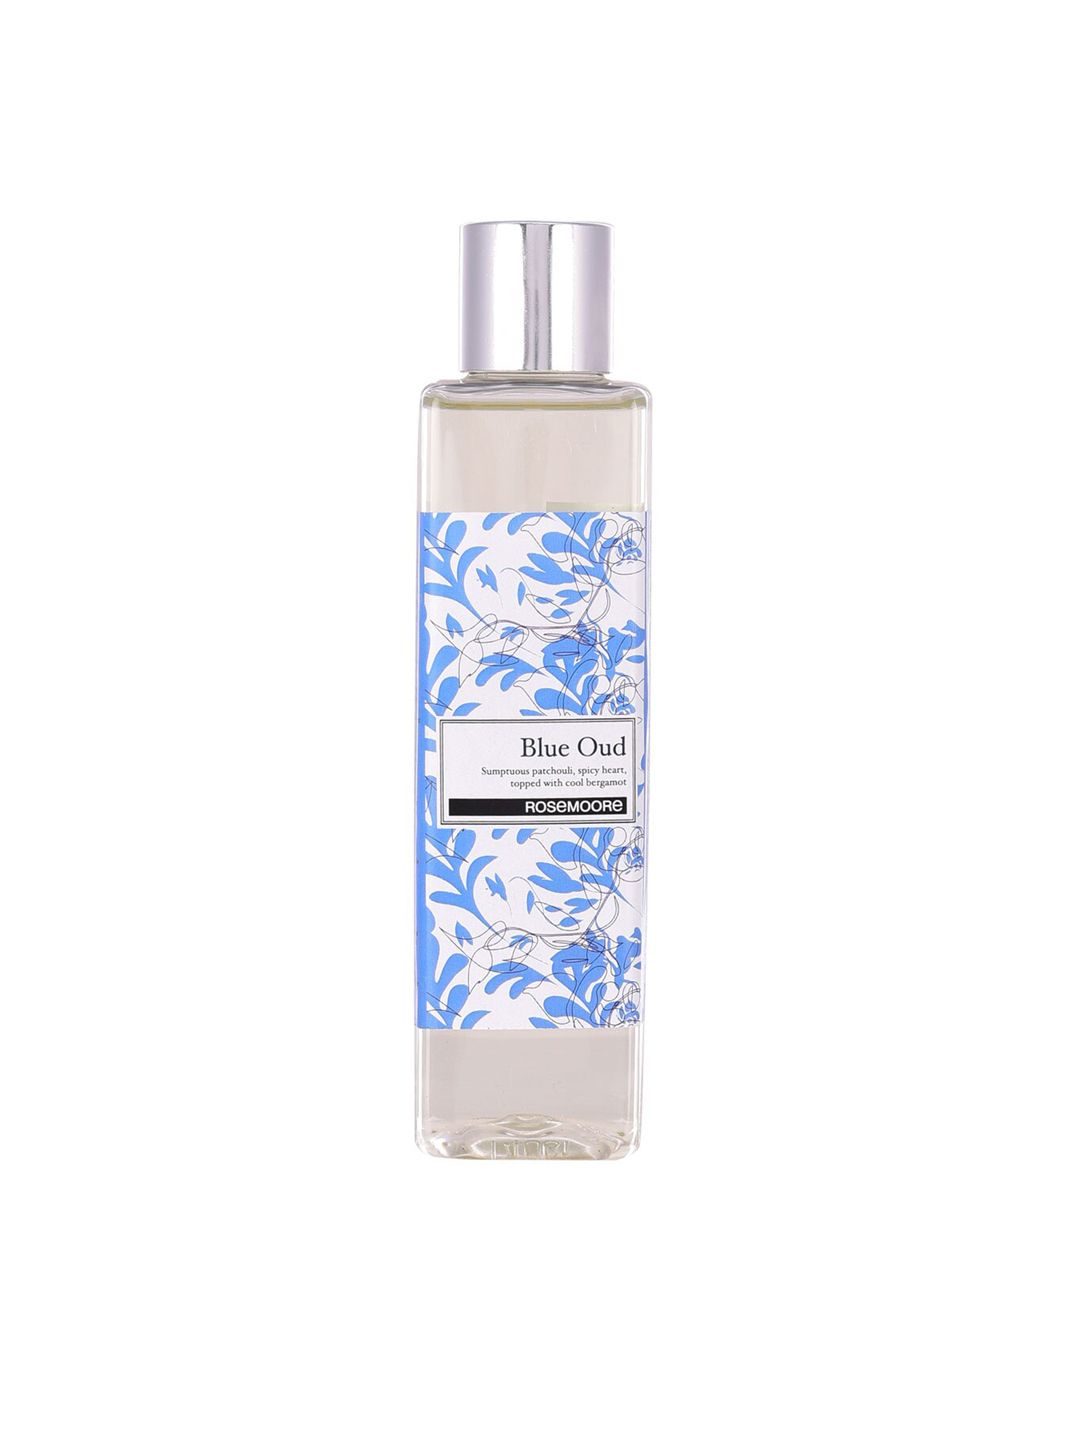 ROSEMOORe Scented Reed Blue Oud Diffuser Refill - 200 ml Price in India